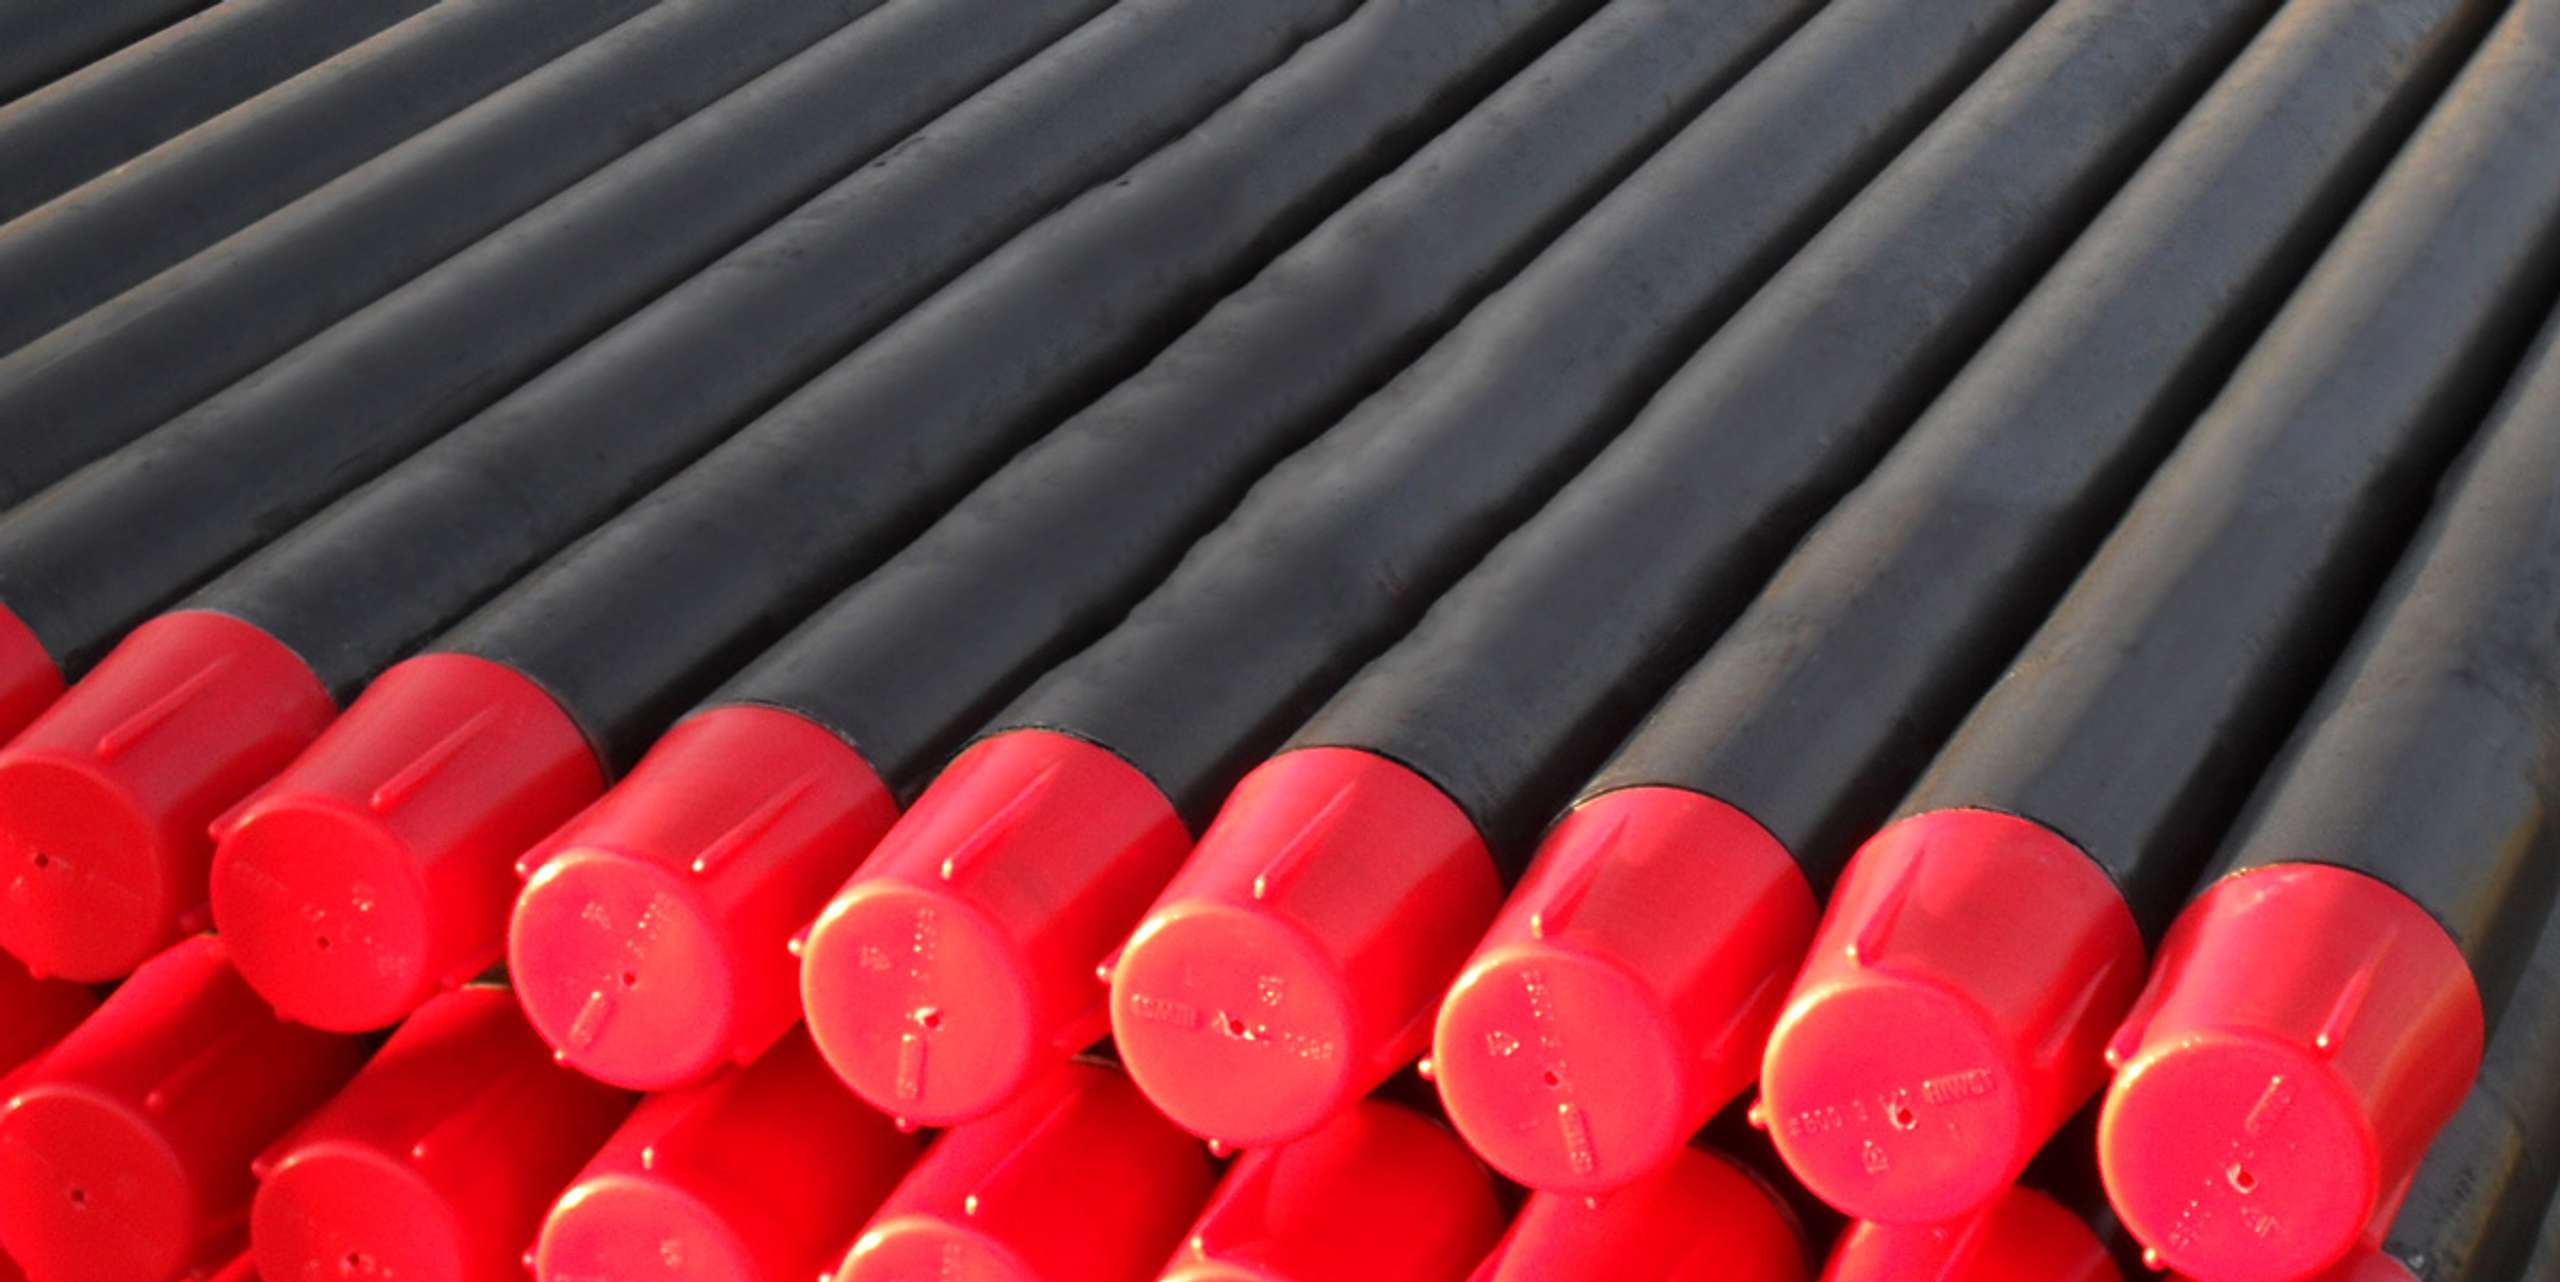 Black tubes with red caps stacked